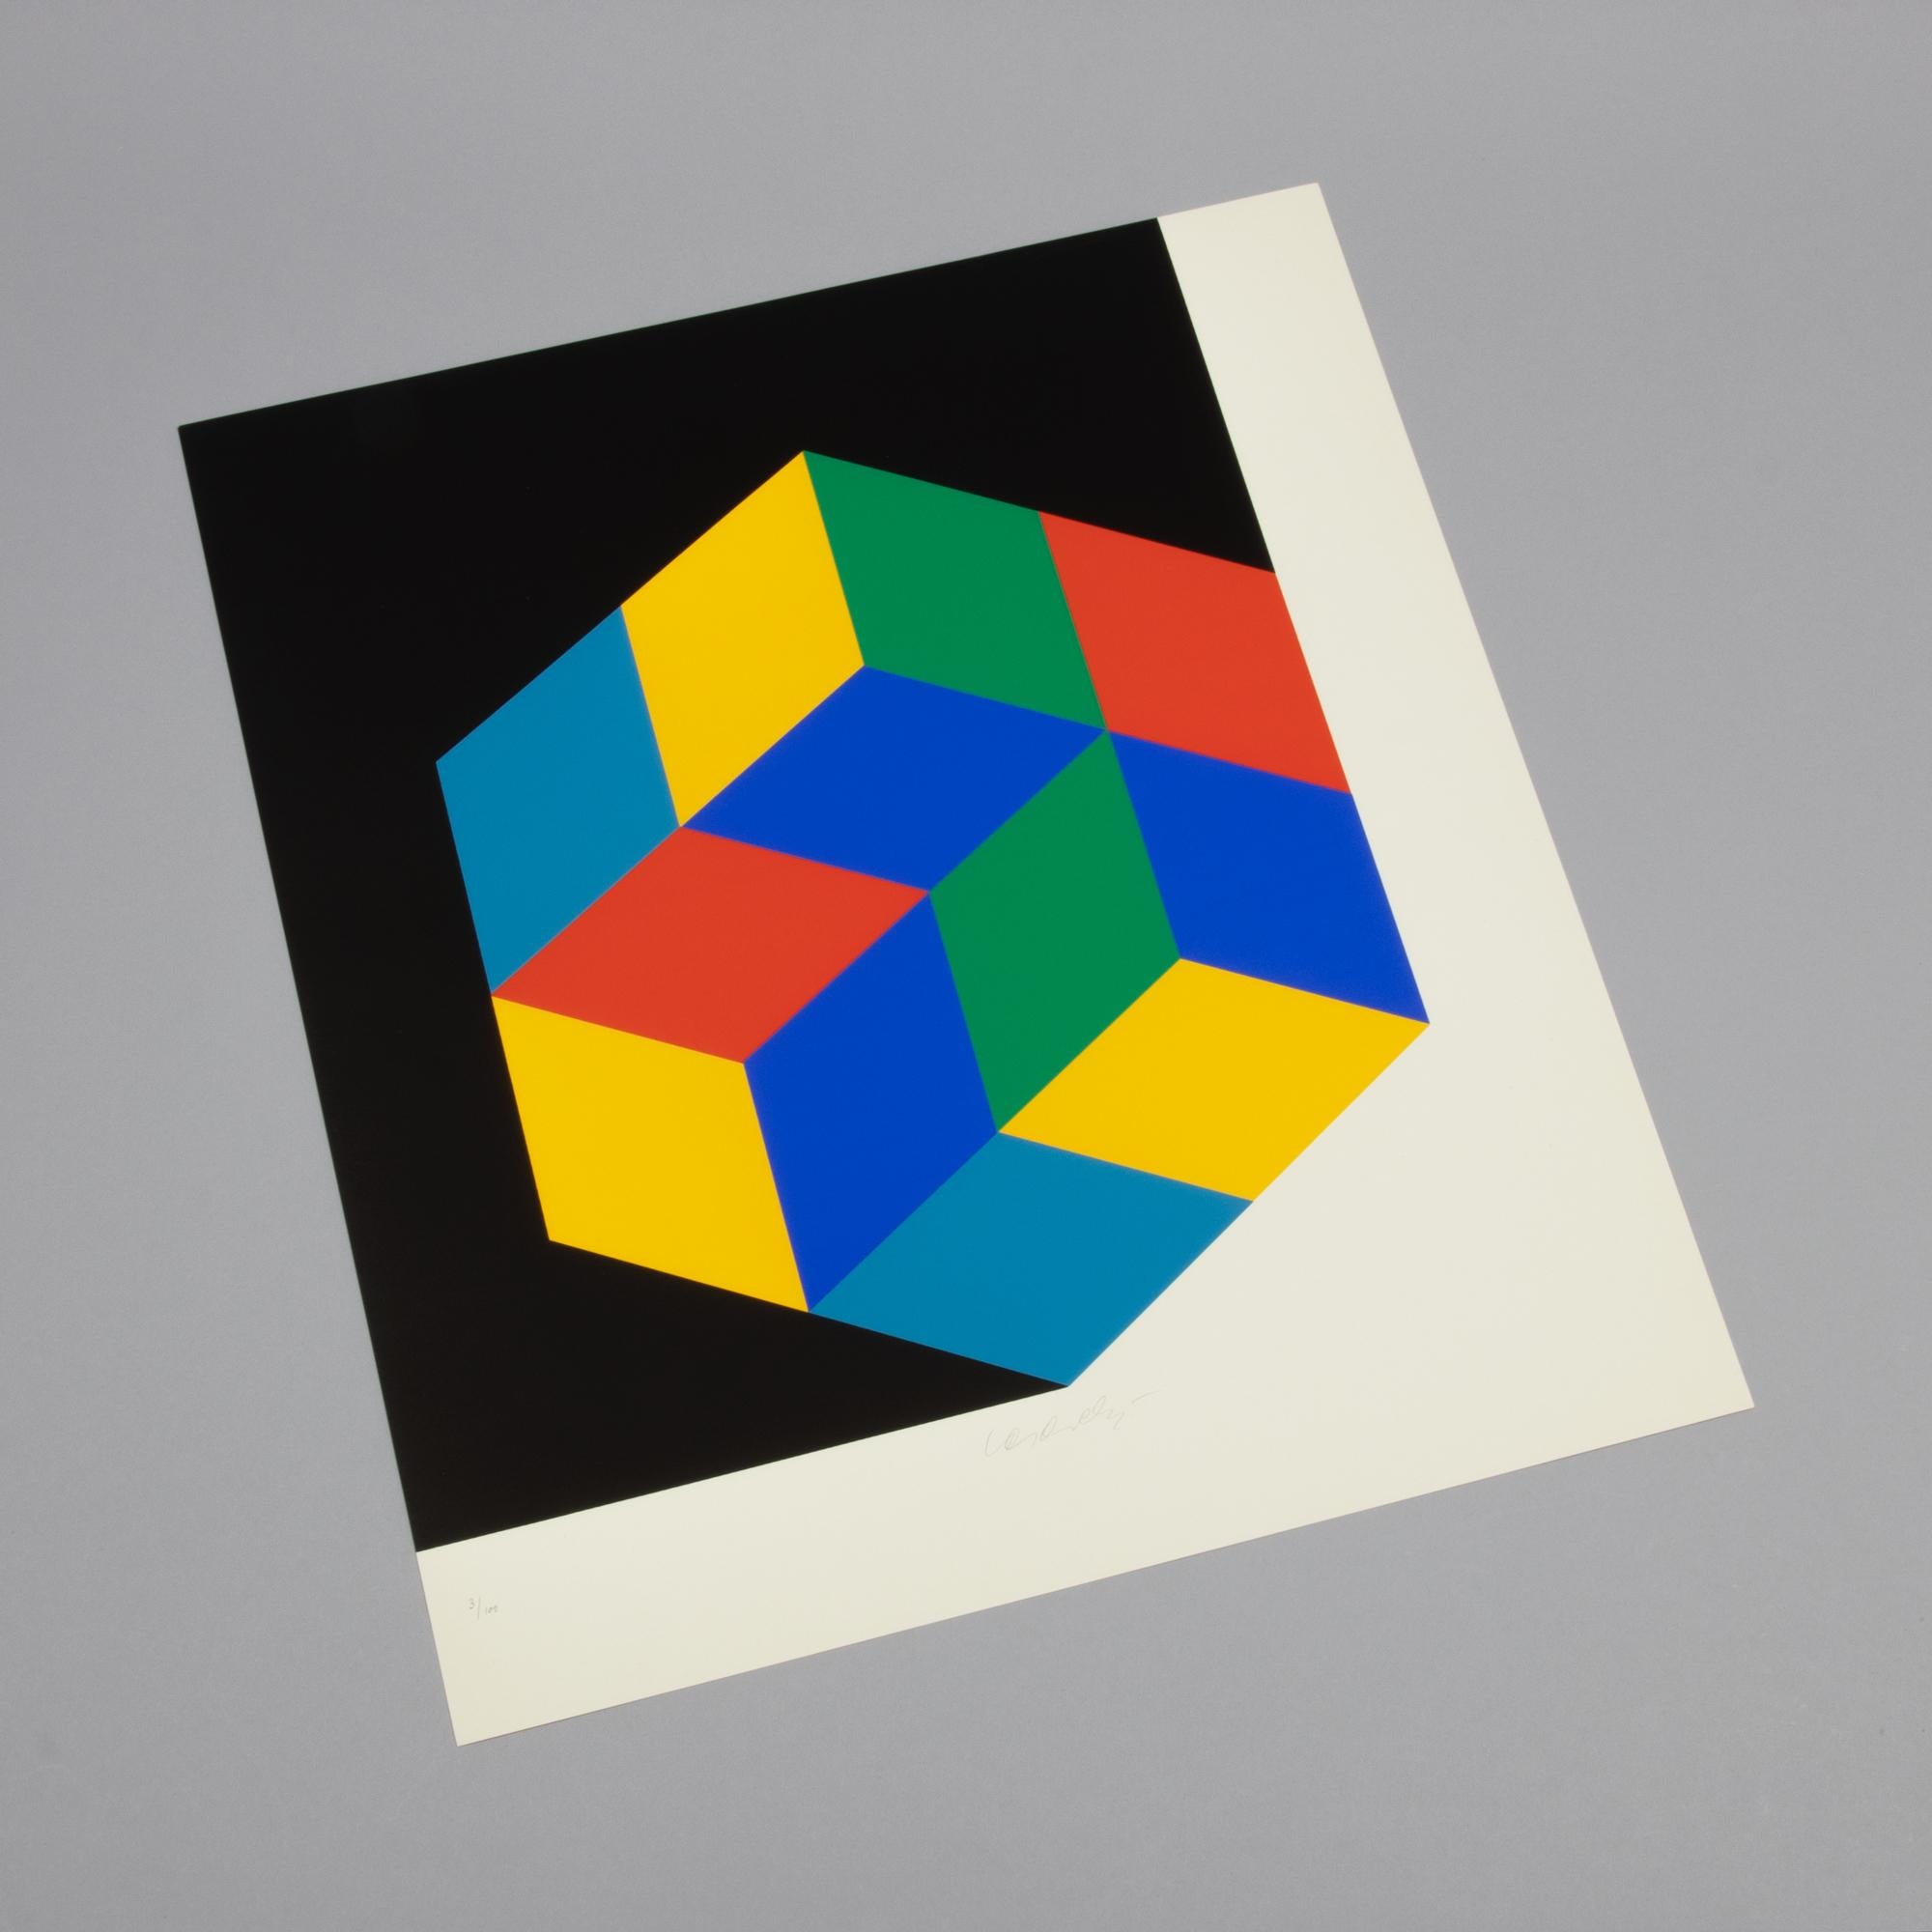 Victor Vasarely (Pécs 1906 – 1997 Paris)
Crystal, ca. 1965
Medium: Screenprint on paper
Dimensions: 54.7 x 49.5 cm
Edition of 100: Hand-signed and numbered in pencil
Condition: Very good (minor traces of age)